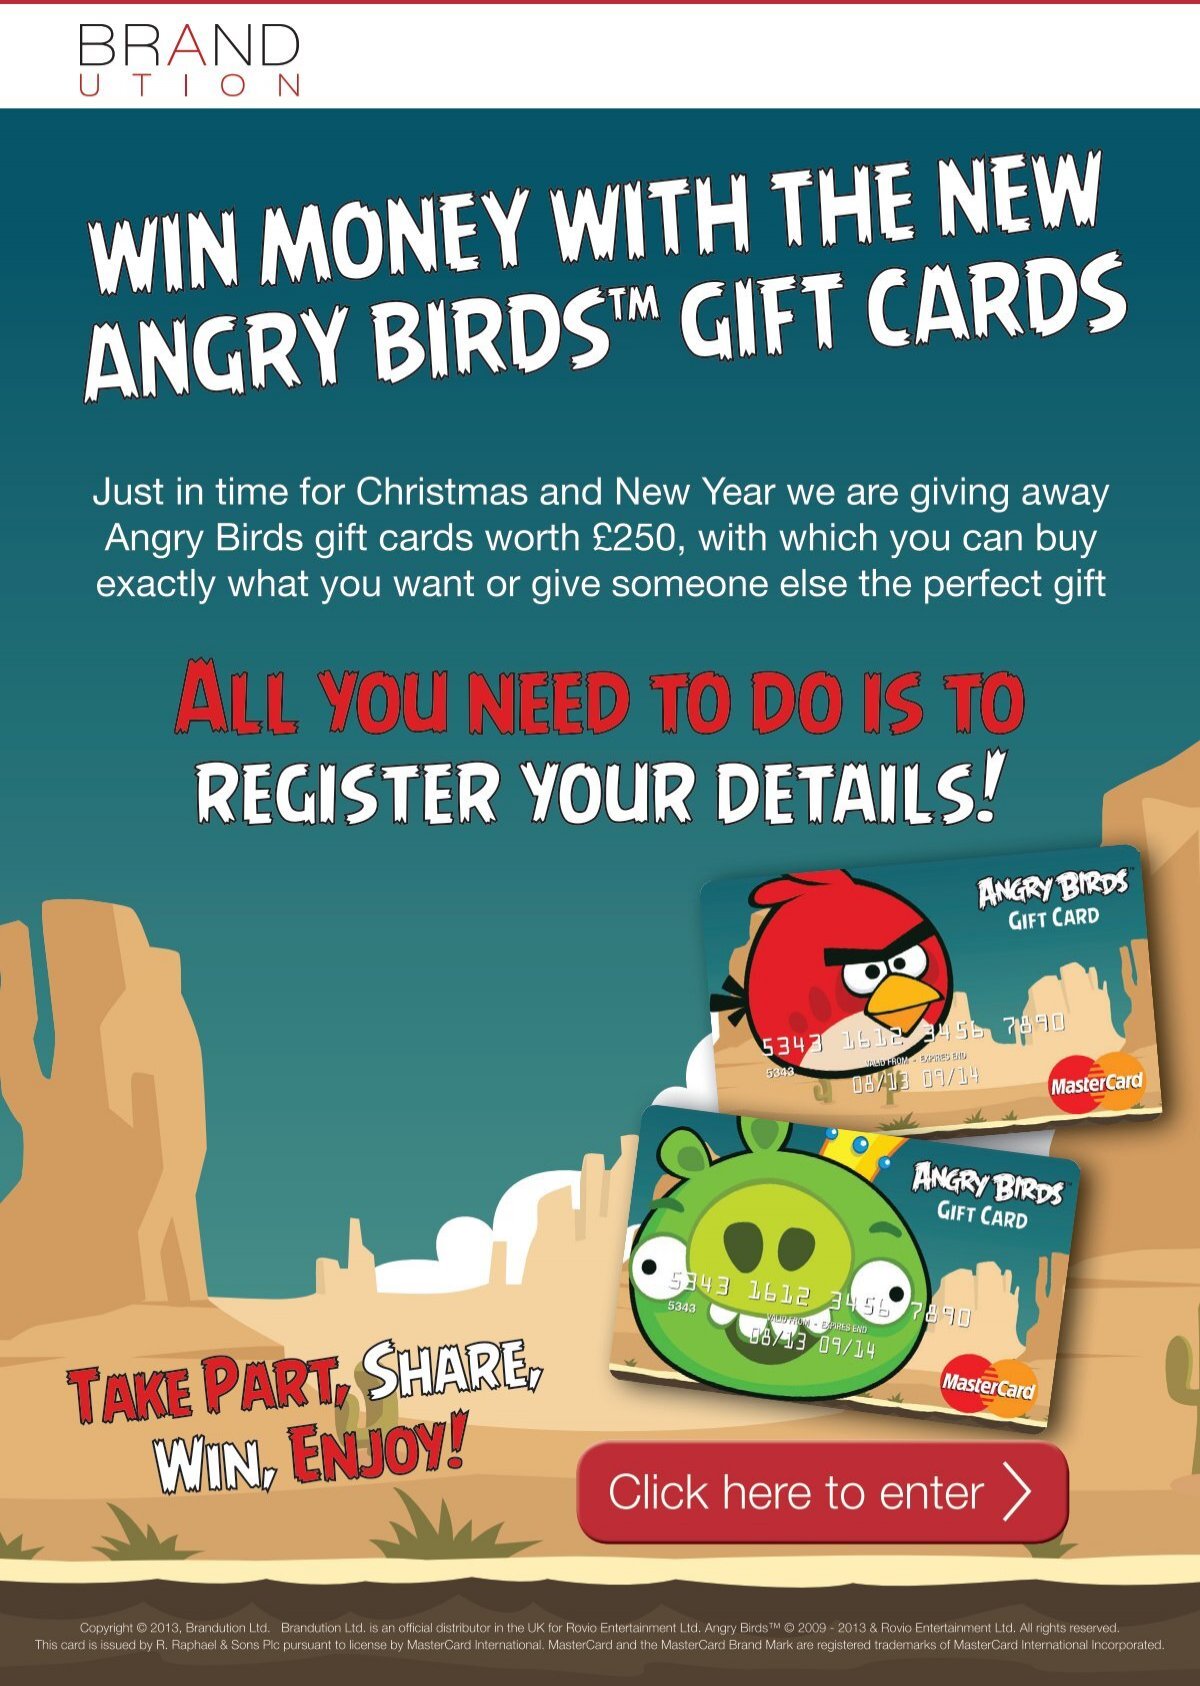 WIN MONEY WITH THE NEW ANGRY BIRDS GIFT CARDS